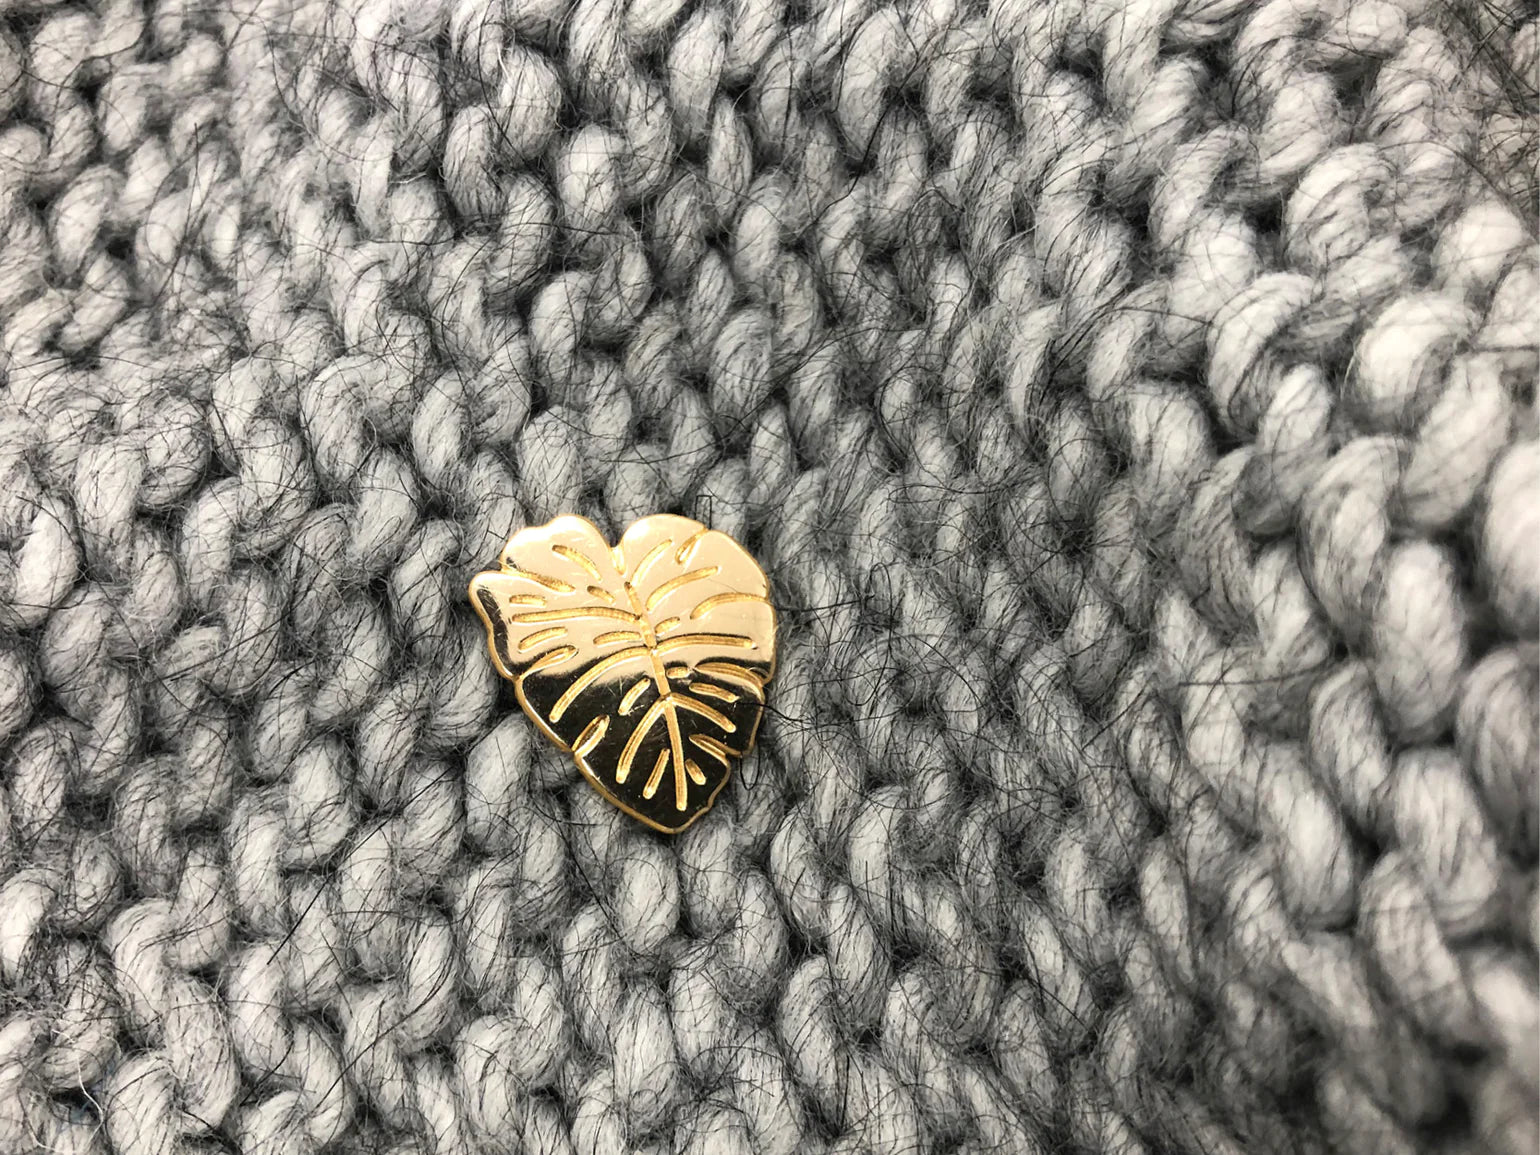 gold plated handmade plant leaf pin by Typealive, on grey knit